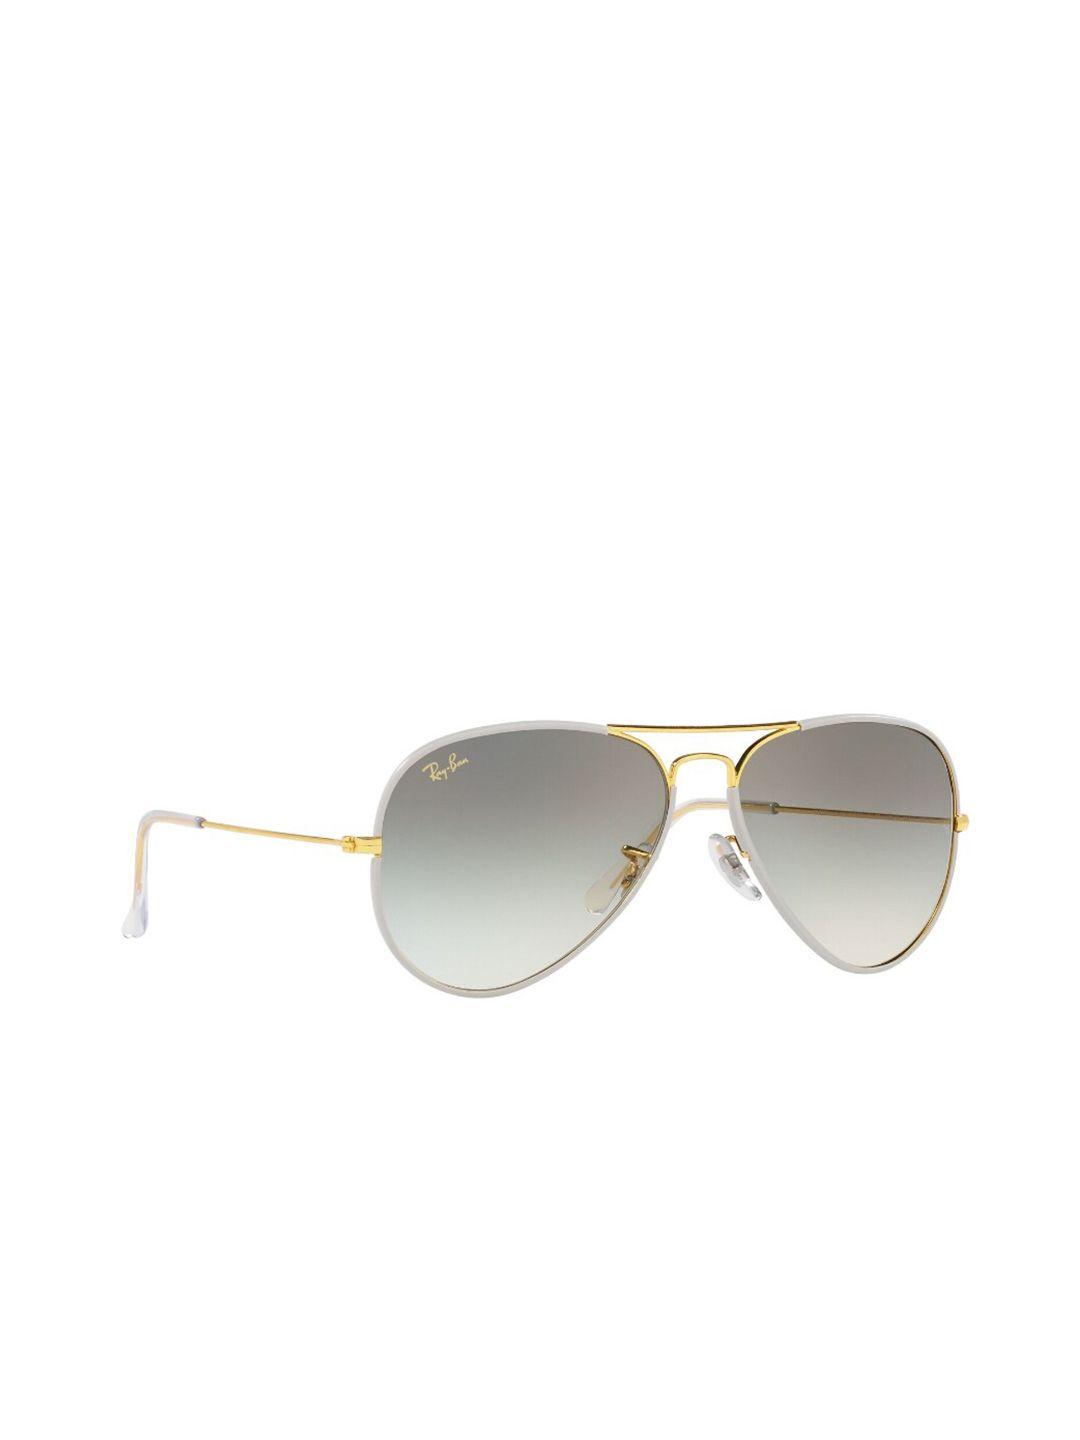 ray-ban men aviator sunglasses with uv protected lens 8056597446518